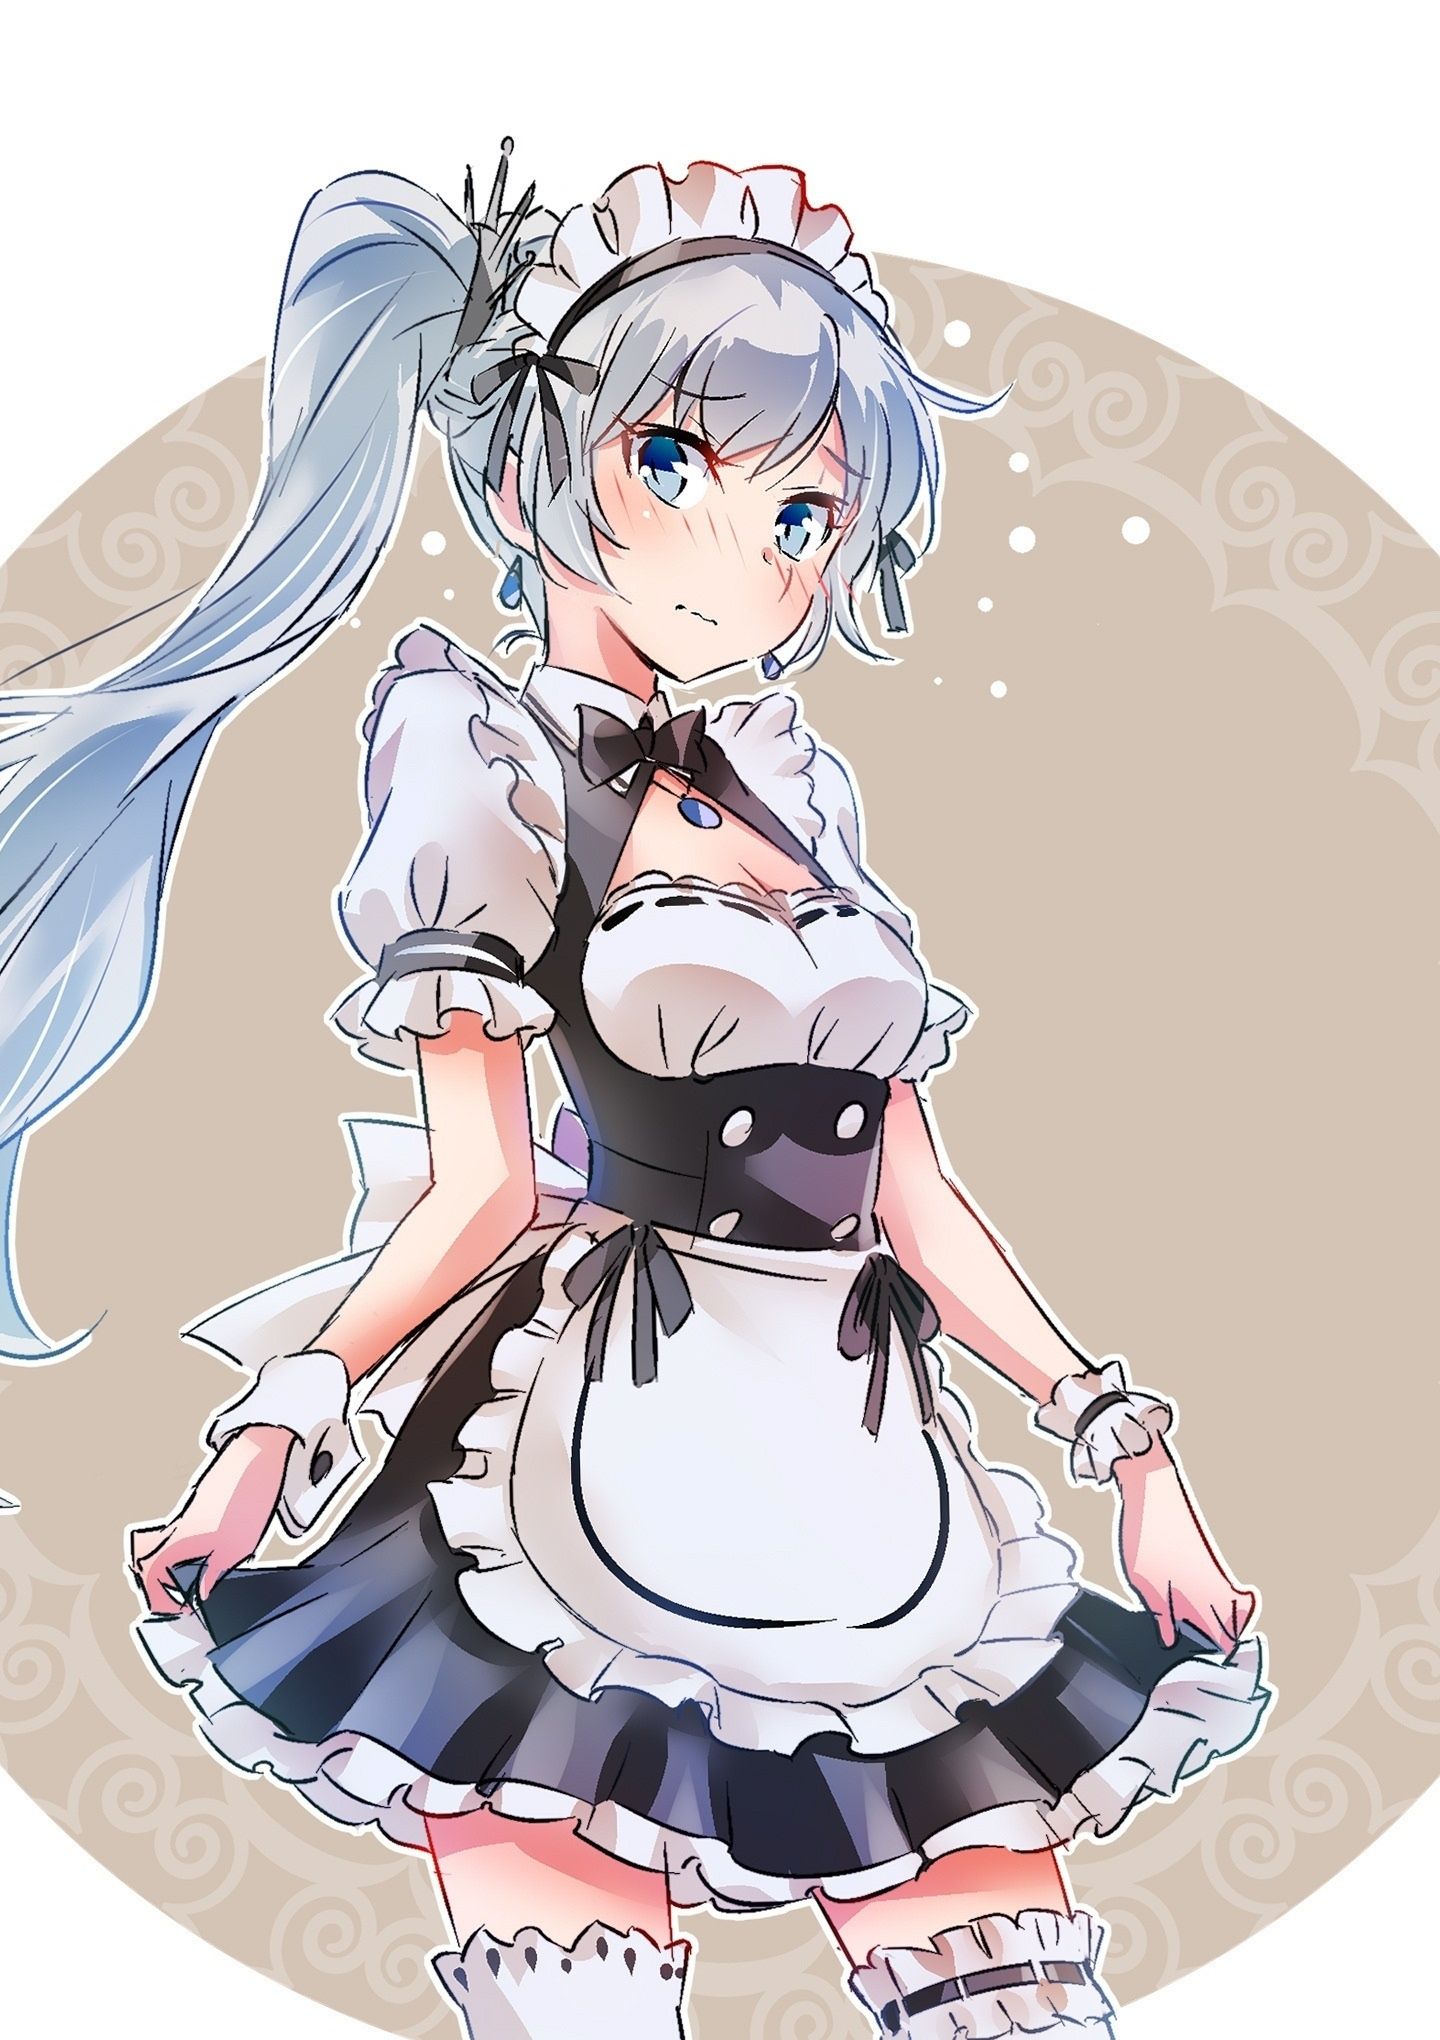 Download 1440x2880 wallpaper maid, weiss schnee, anime girl, lg v lg g 1440x2880 HD image, background, 6081